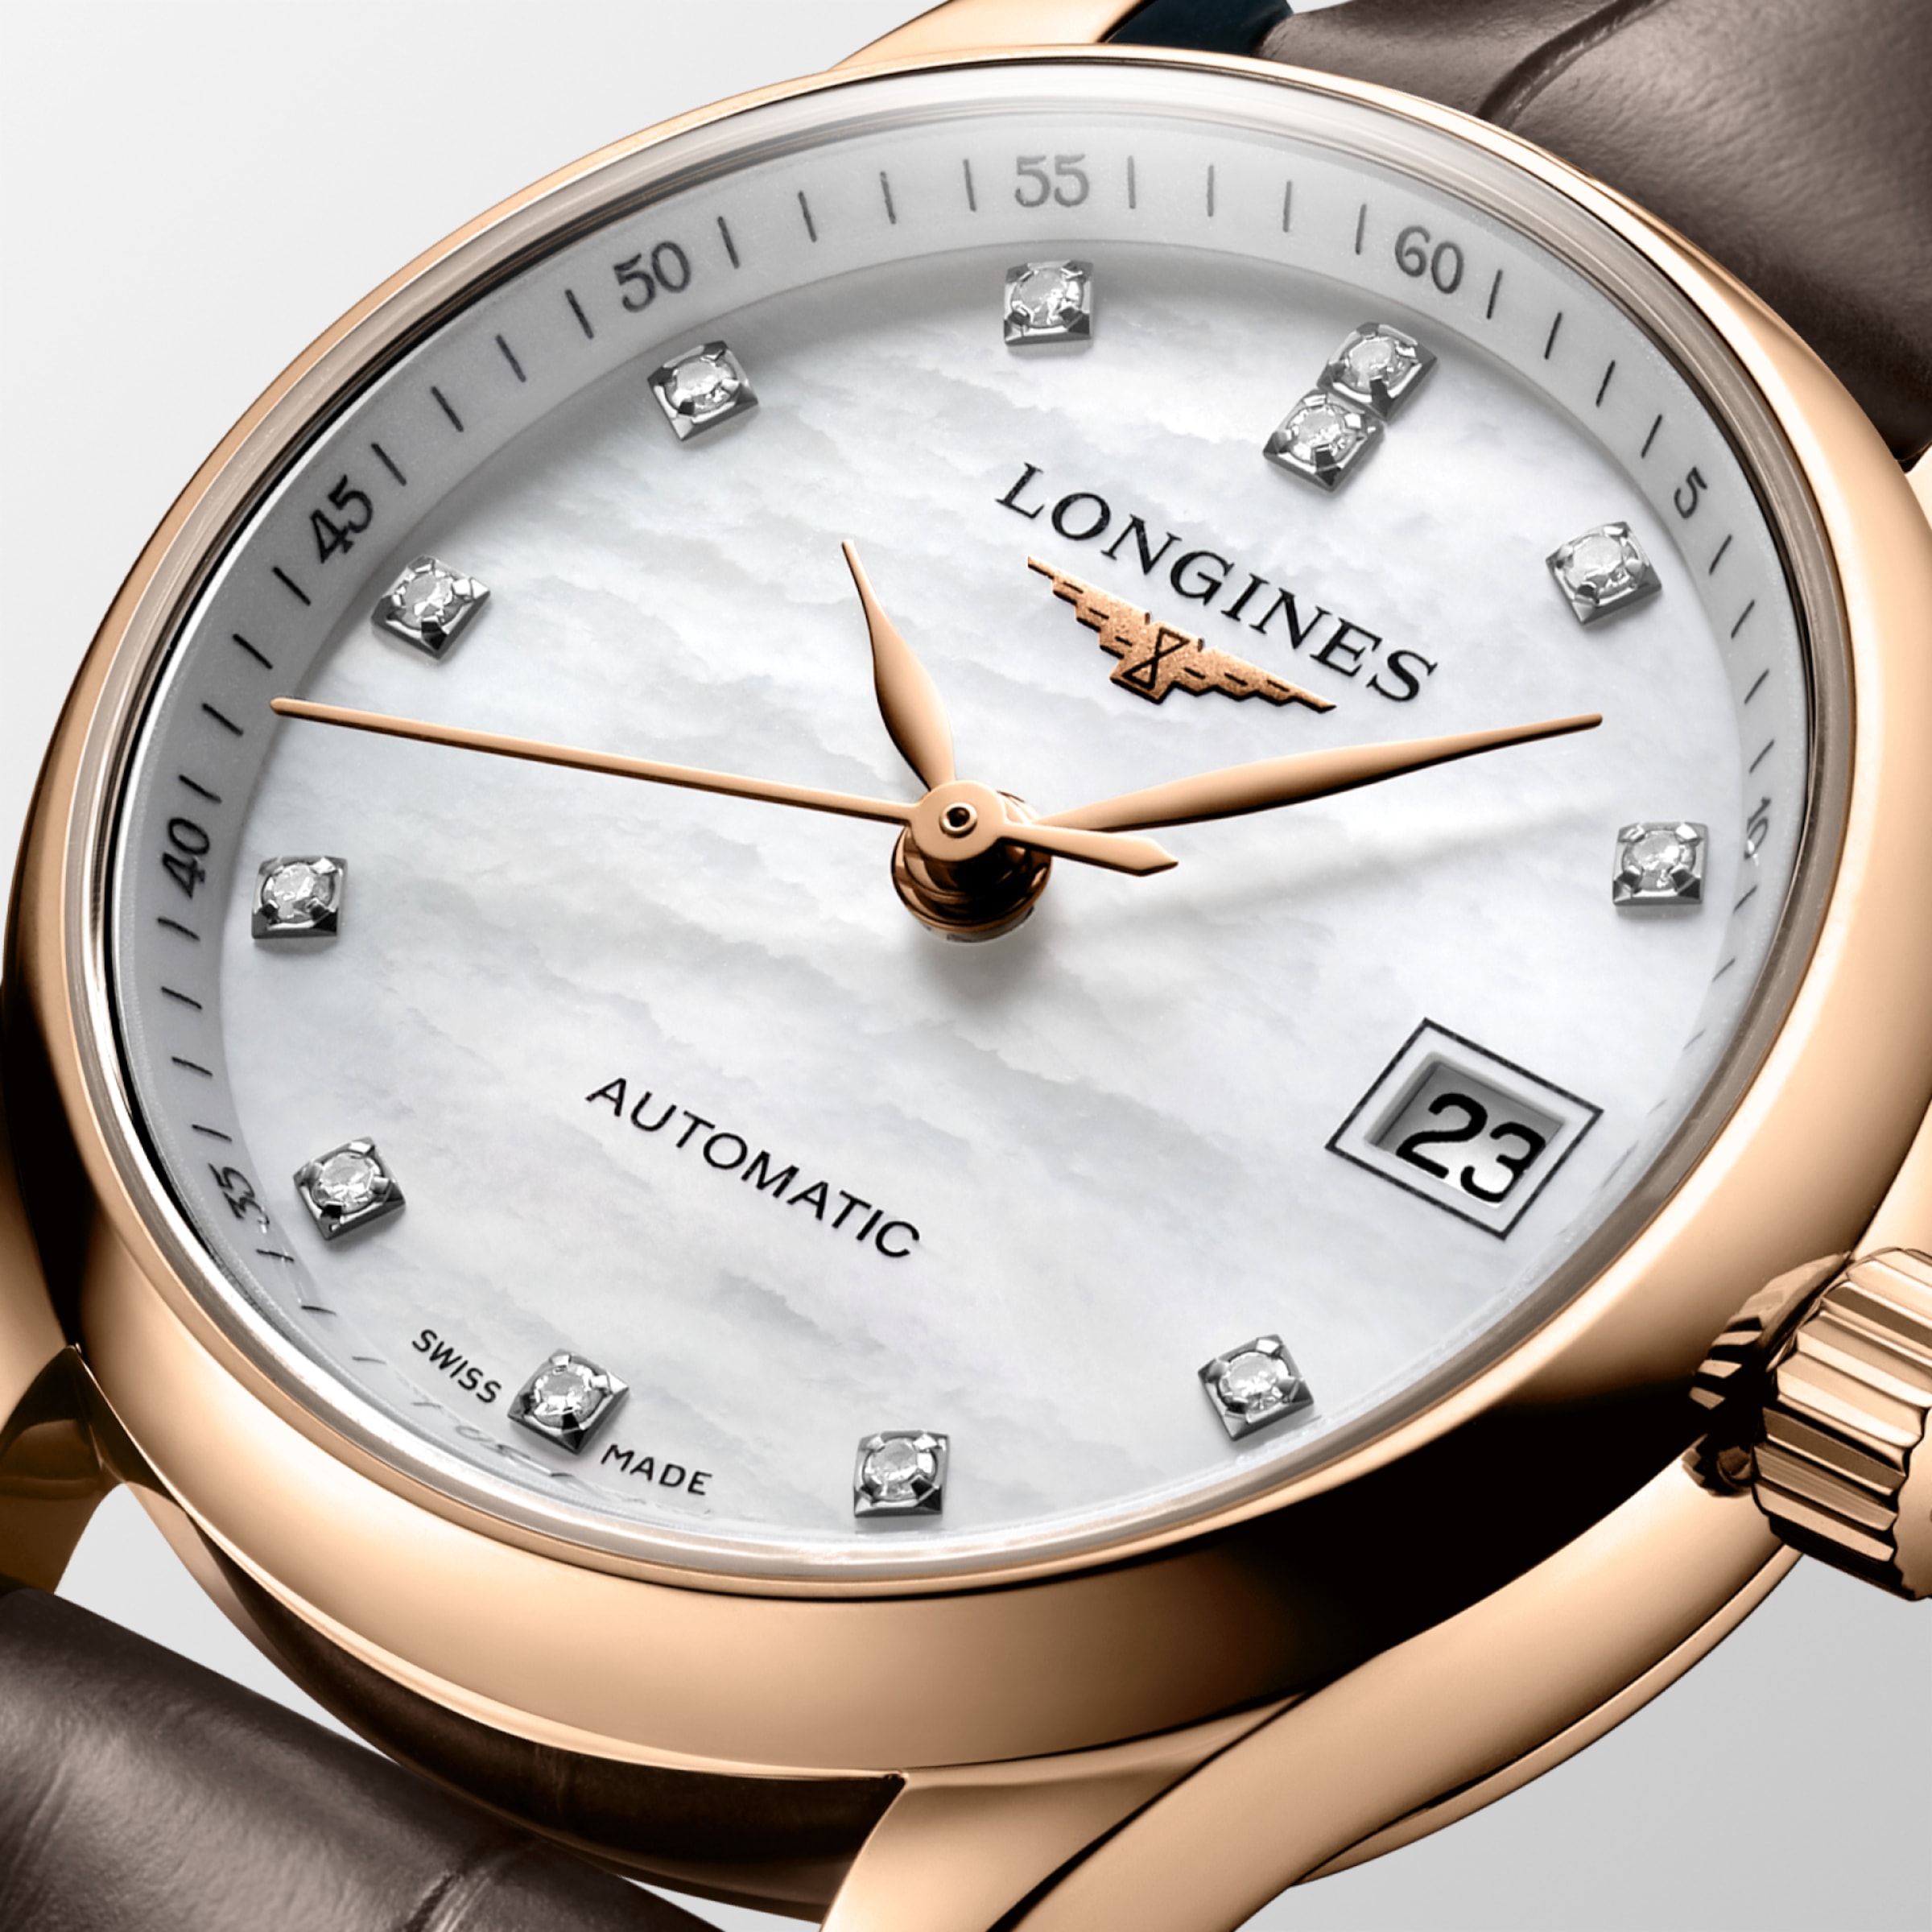 Longines MASTER COLLECTION Automatic 18 karat pink gold Watch - L2.128.8.87.3